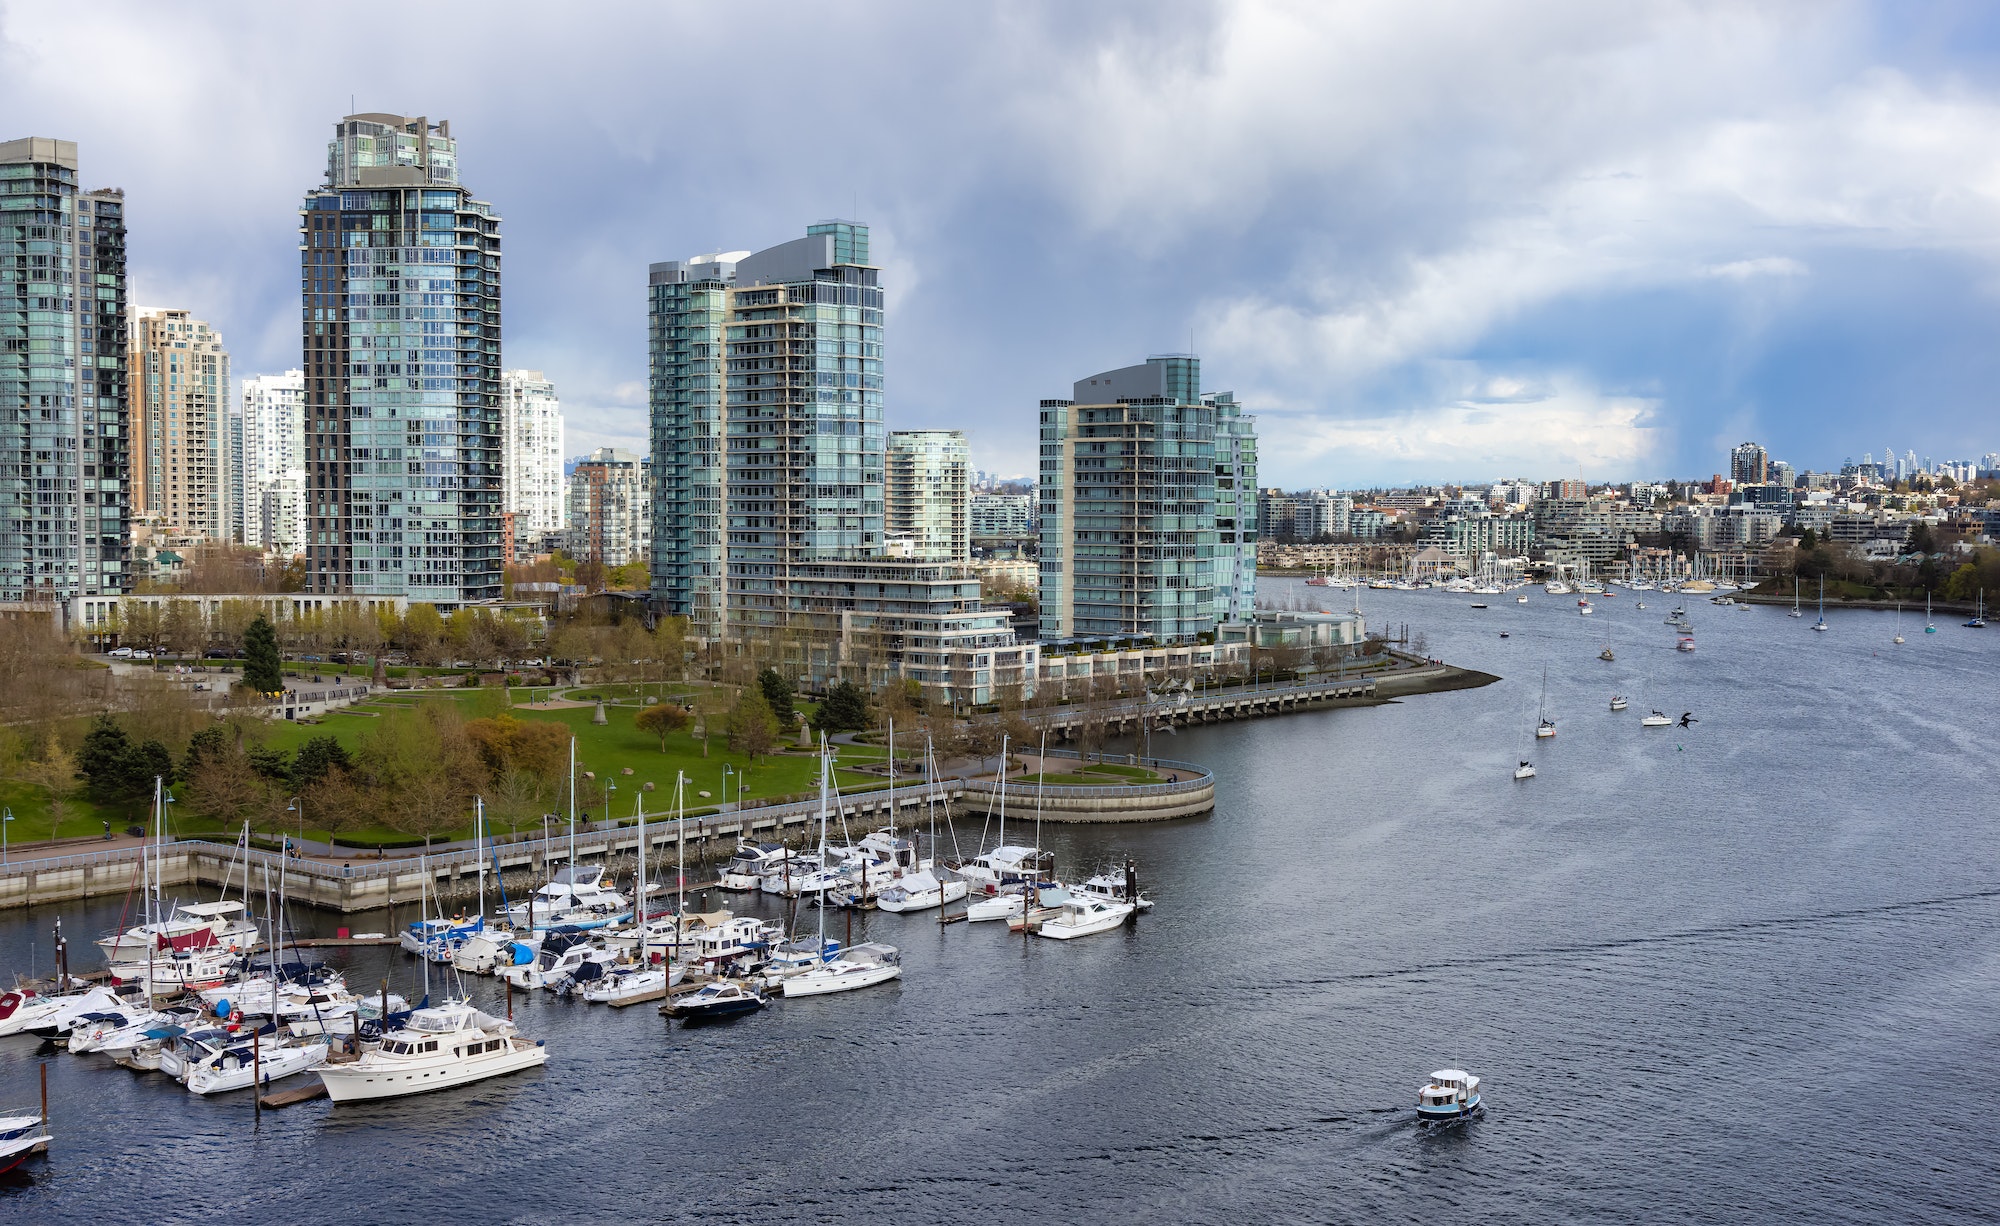 Aerial View of Vancouver Downtown City in False Creek, British Columbia, Canada